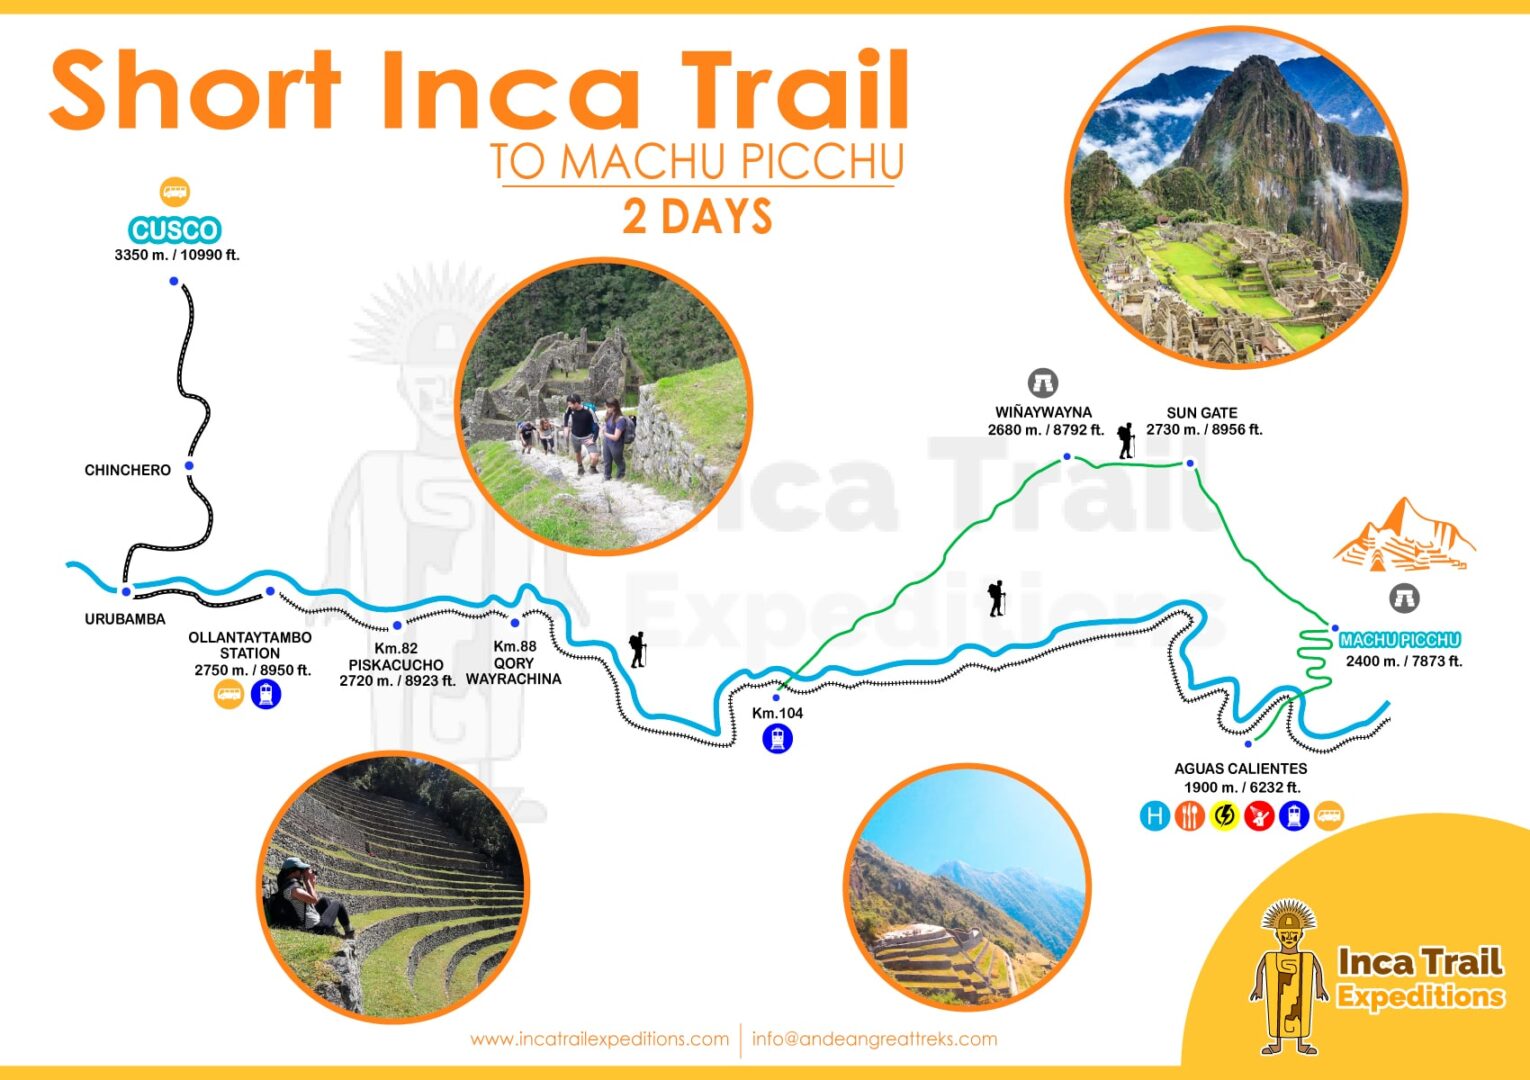 SHORT-INCA-TRAIL-2-DAYS-BY-INCA-TRAIL-EXPEDITIONS